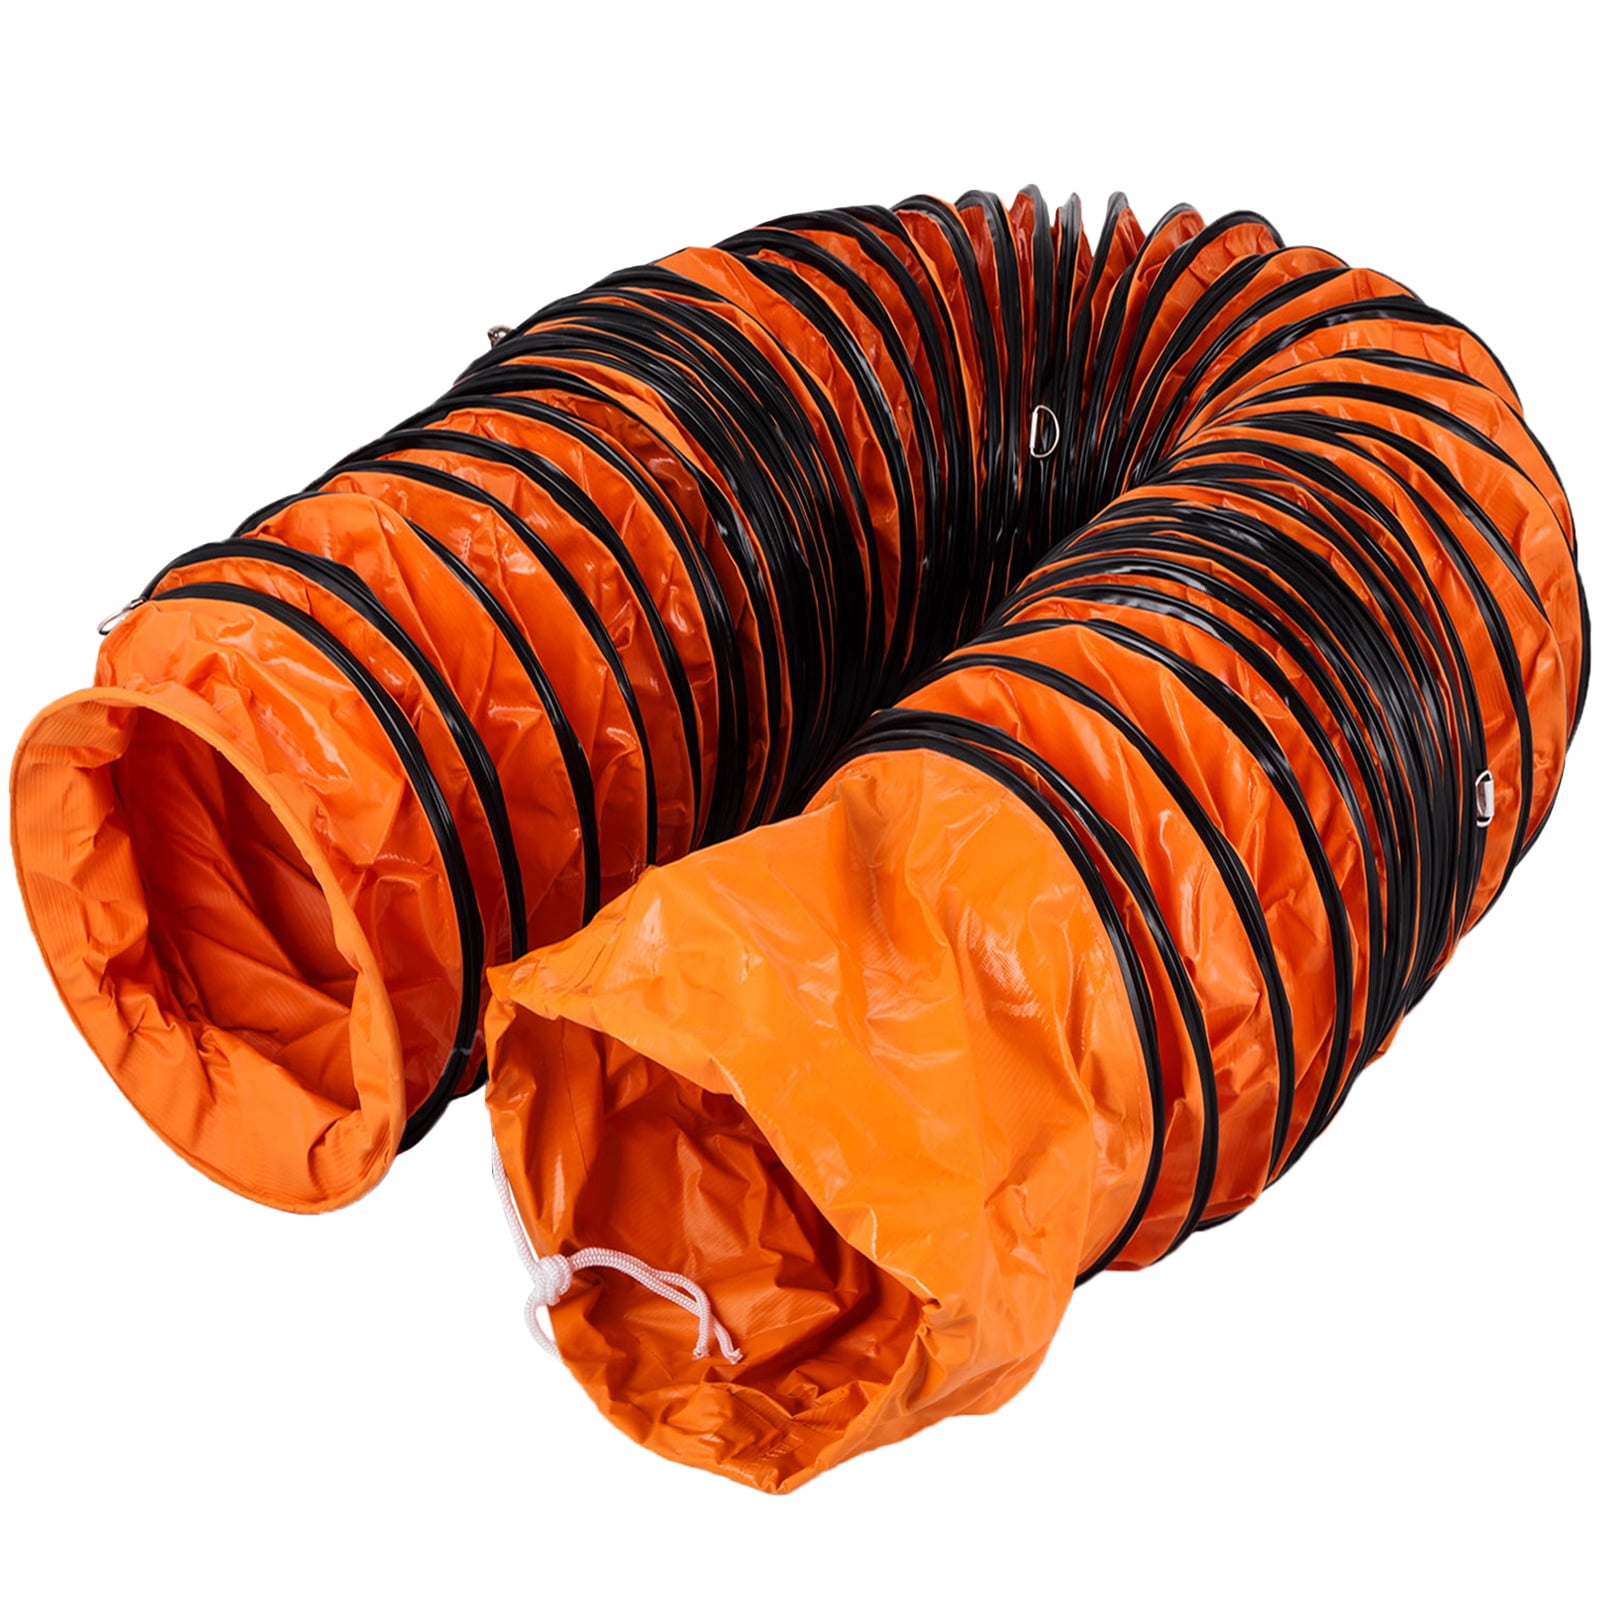 Best Insulated Flexible Duct R6 Fiberglass Insulation Silver Jacket 4 in X 25 FT for sale online